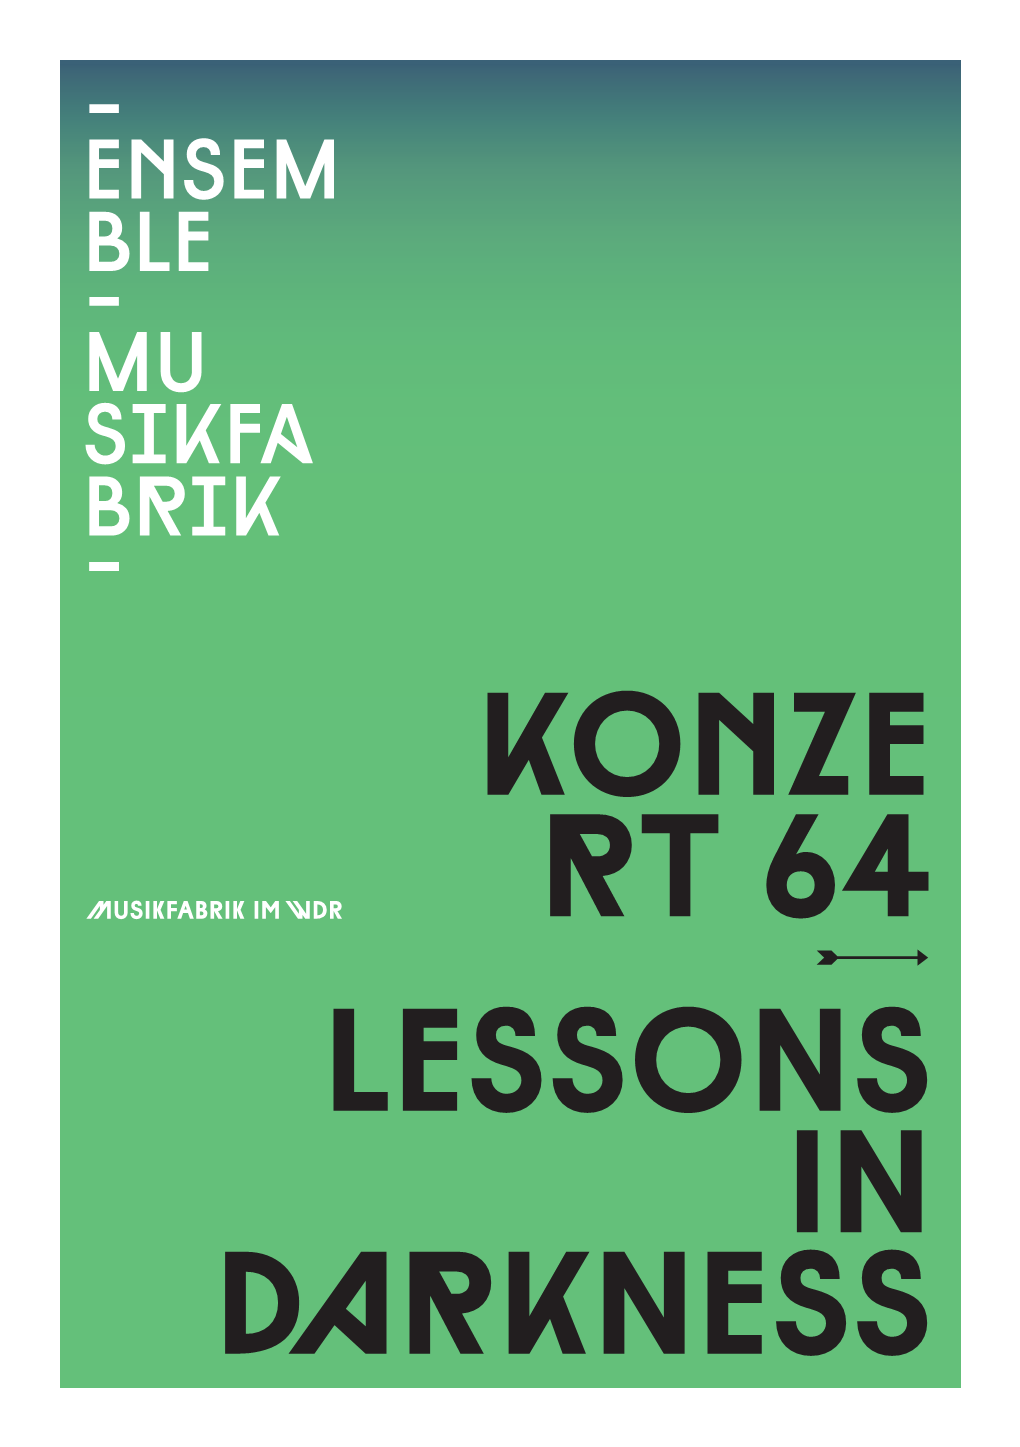 Konze Rt 64 Lessons in Darkness